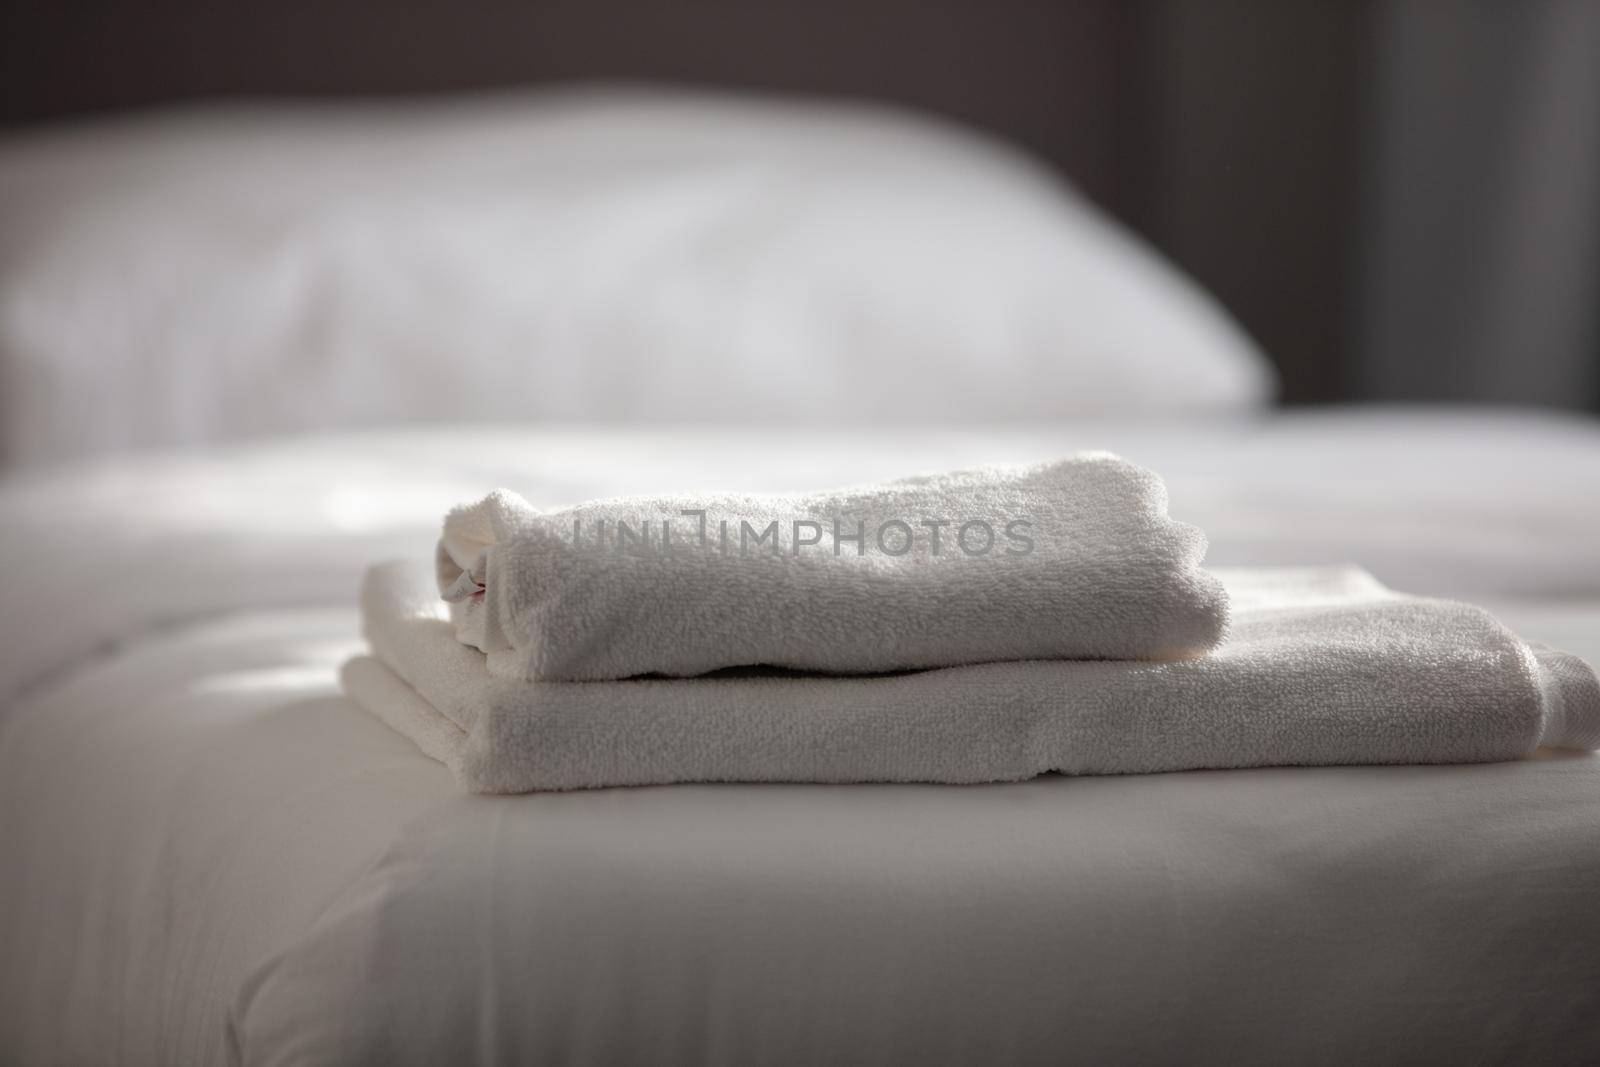 White clean towels stacked on the hotel bed. High quality photo